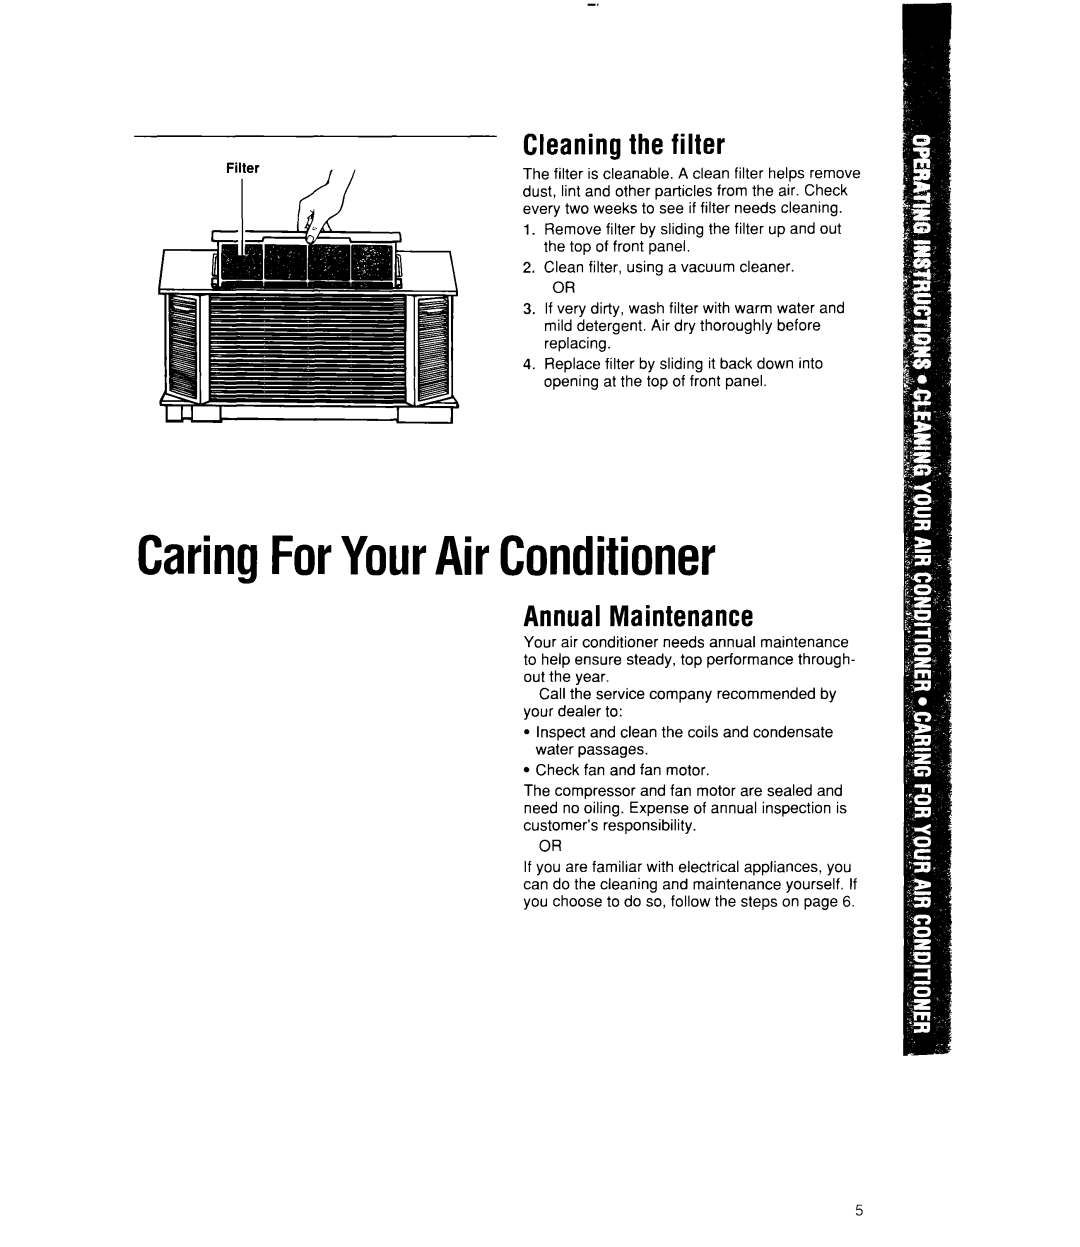 Whirlpool ACU082, ACQ102, ACQ122, ACQ082, ACU124, ACU102 CaringForYourAirConditioner, Cleaning the filter, Annual Maintenance 